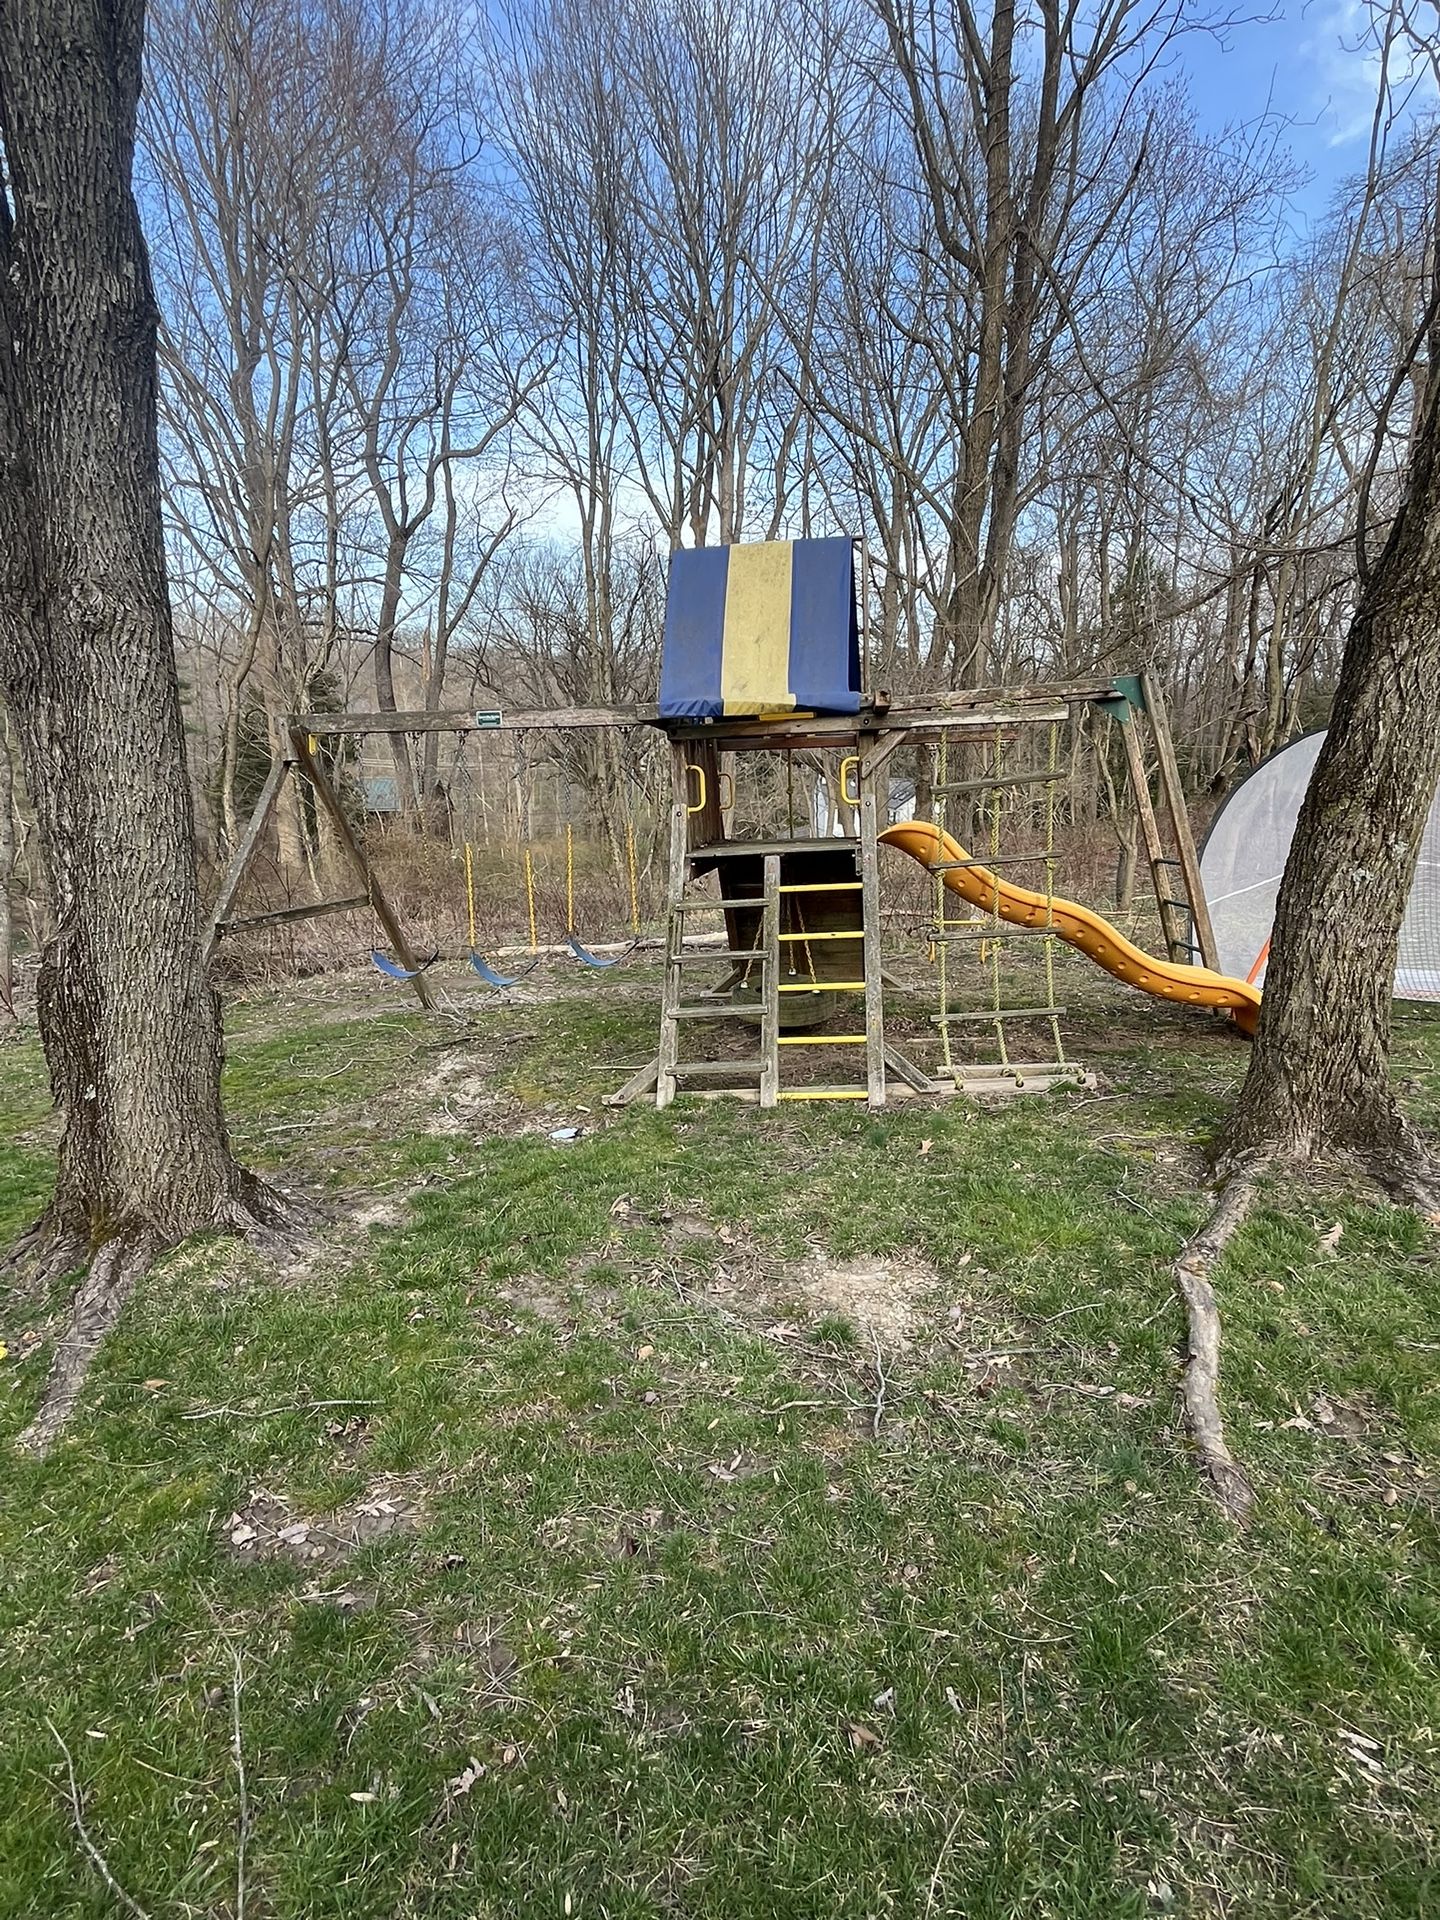 Swing Set Must Pick Up As Is And Dissemble Read Description 